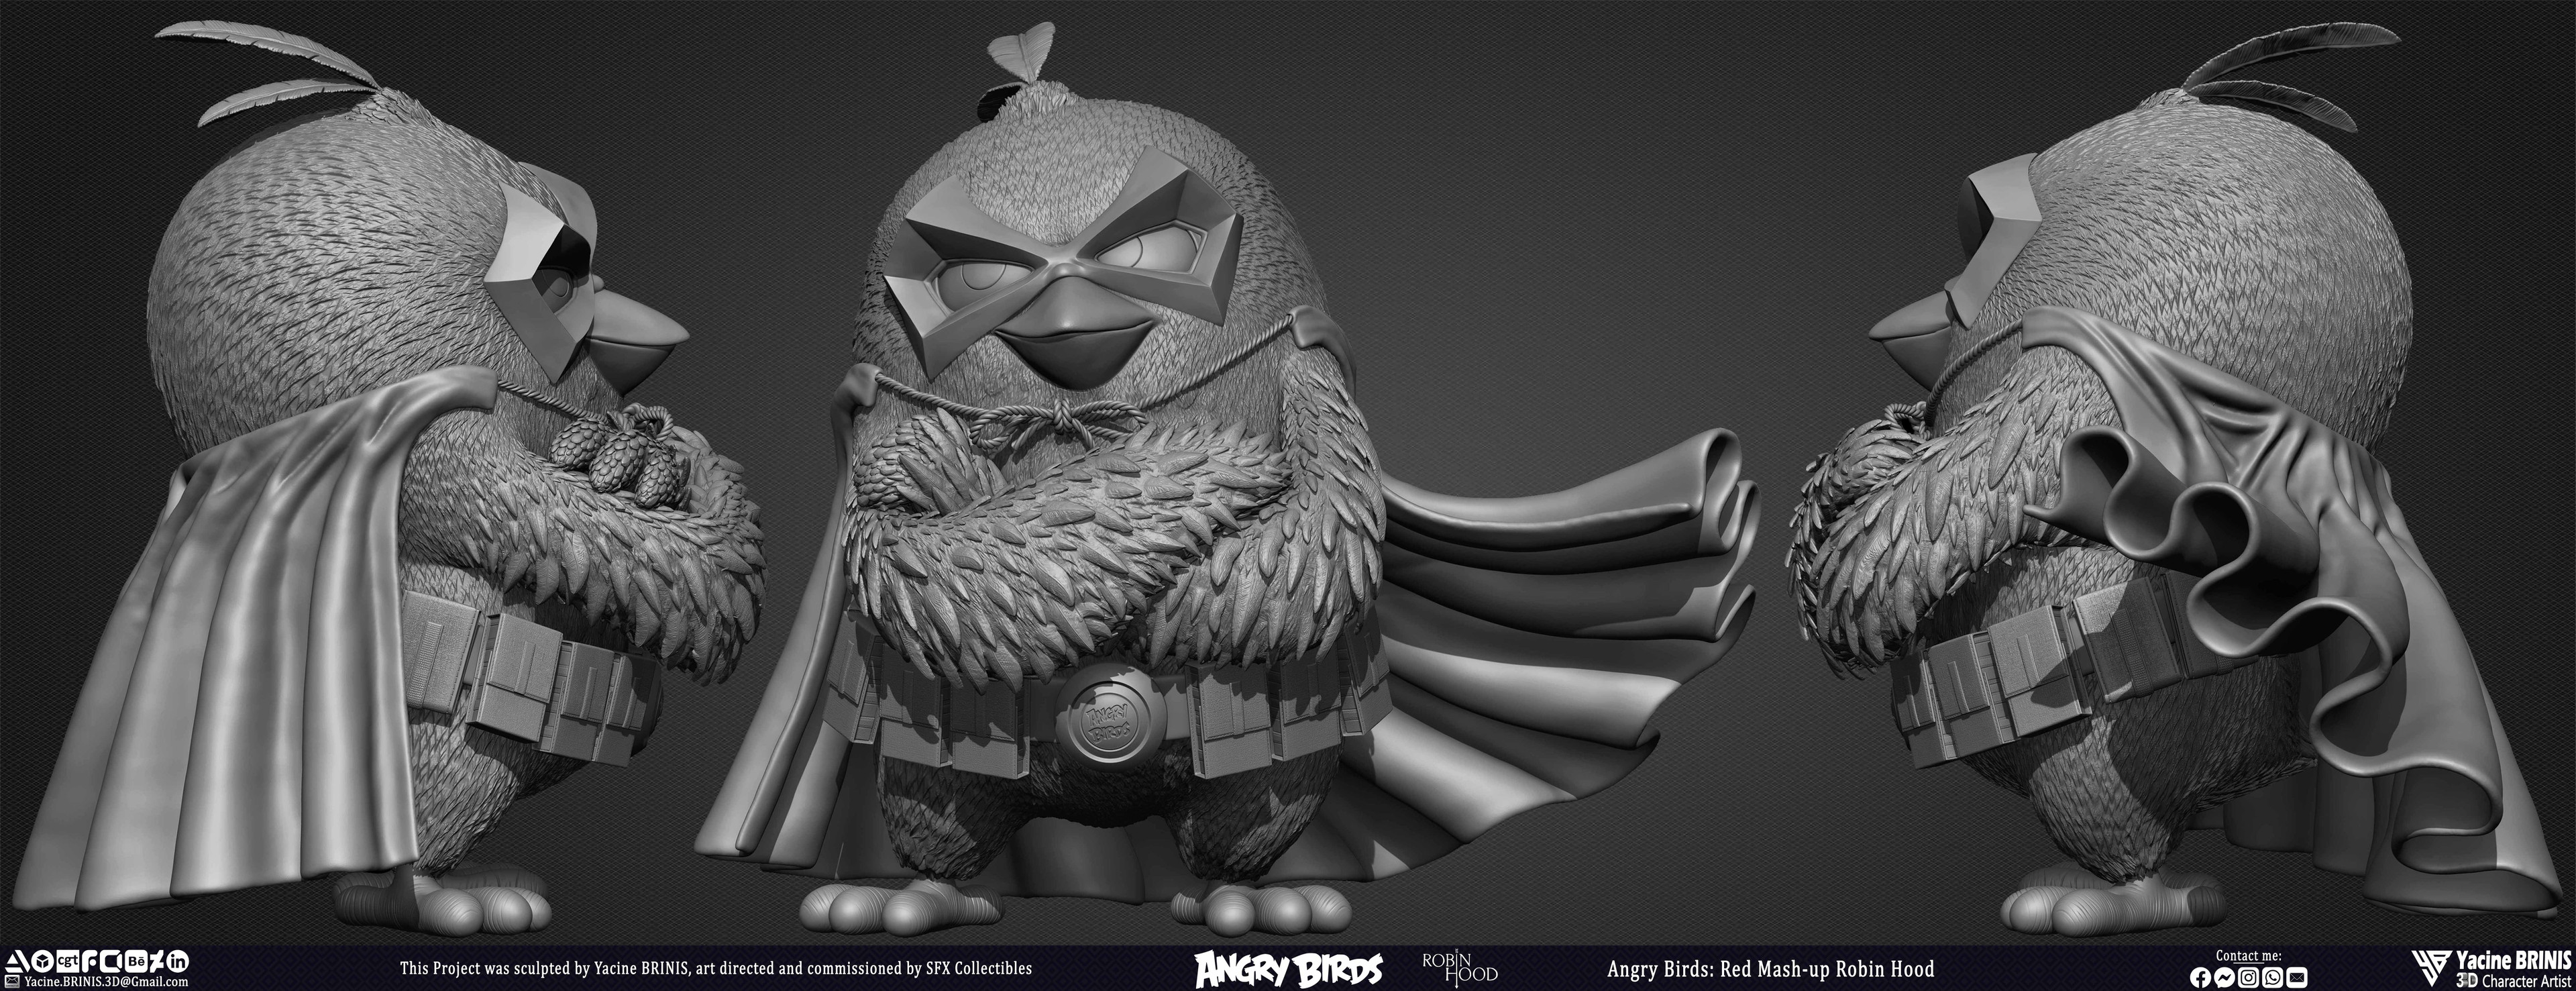 Red Mash up Angry Birds Movie 02 Robin Hood Rovio Entertainment sculpted By Yacine BRINIS 005